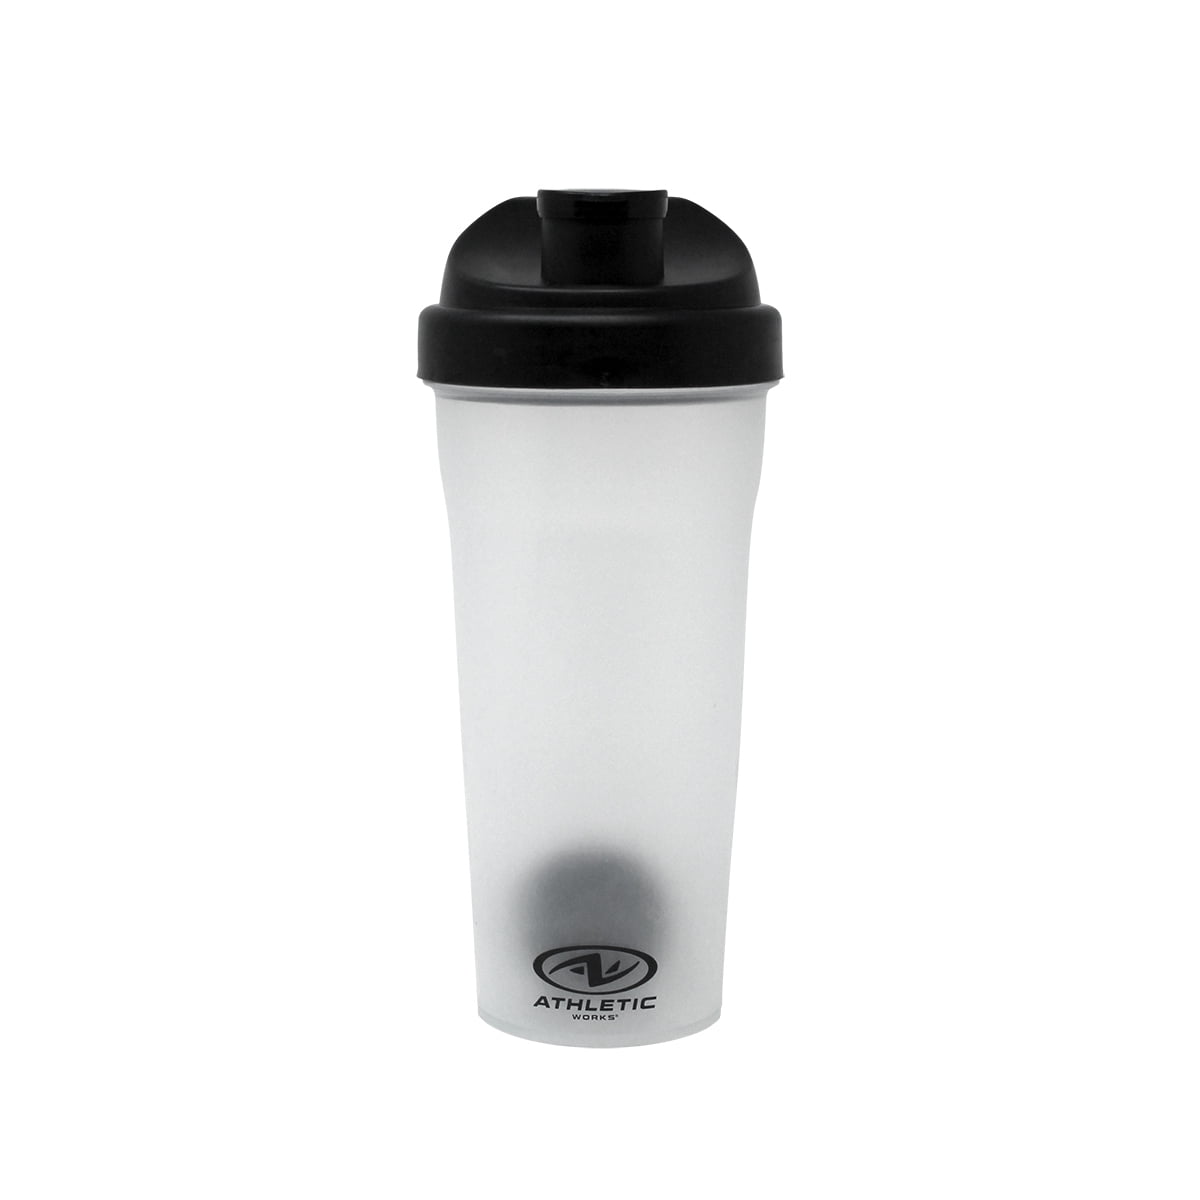 No Pain No Gain Sports Gym Fitness Shaker Bottle Perfect for Protein Shakes and Pre Workout with Plastic Whisk Mixer Ball for Smooth Mix